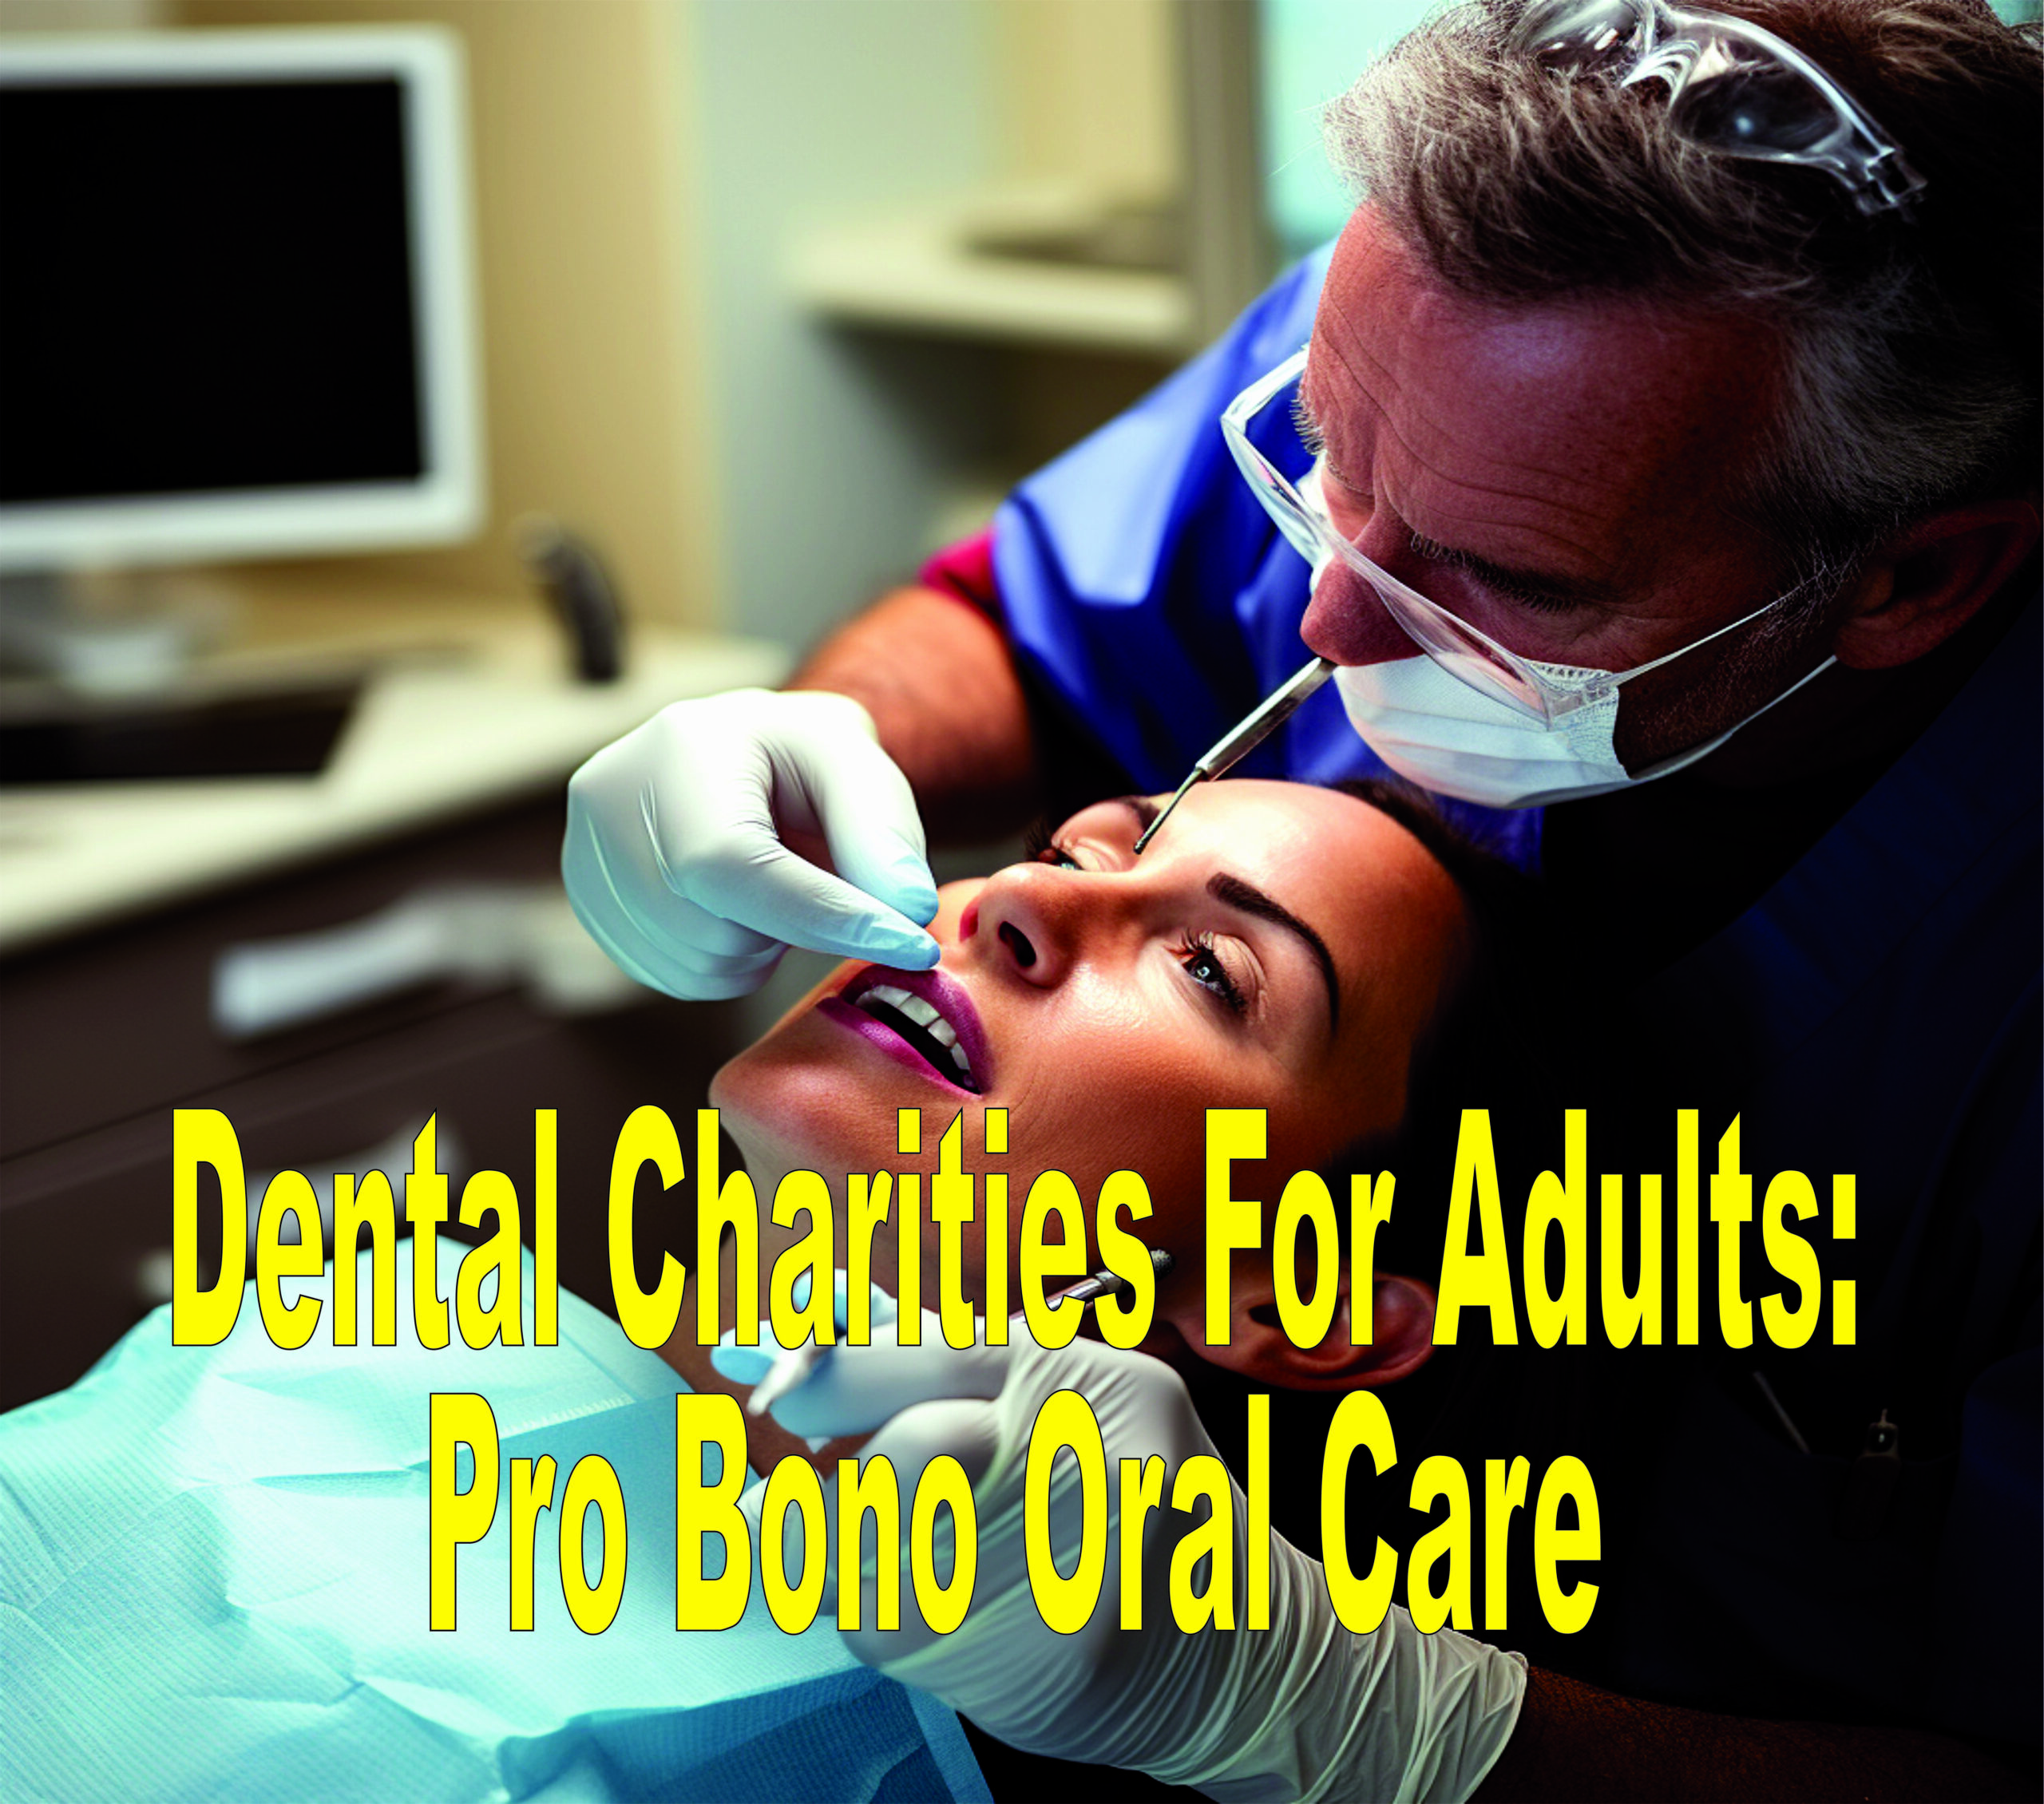 Dental Charities For Adults Pro Bono Oral Care